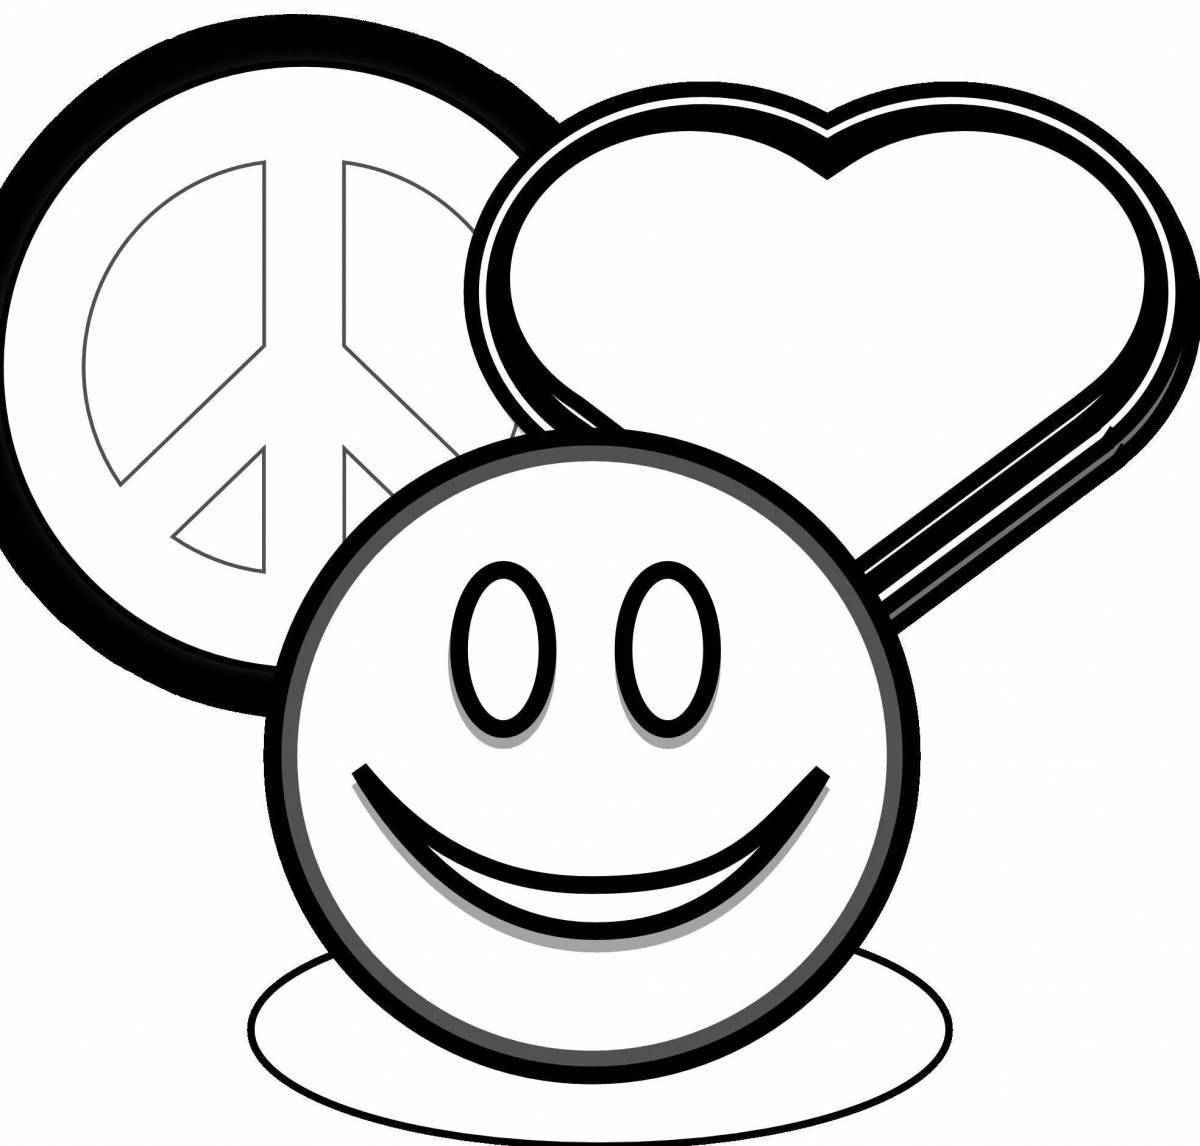 Shining coloring page icons